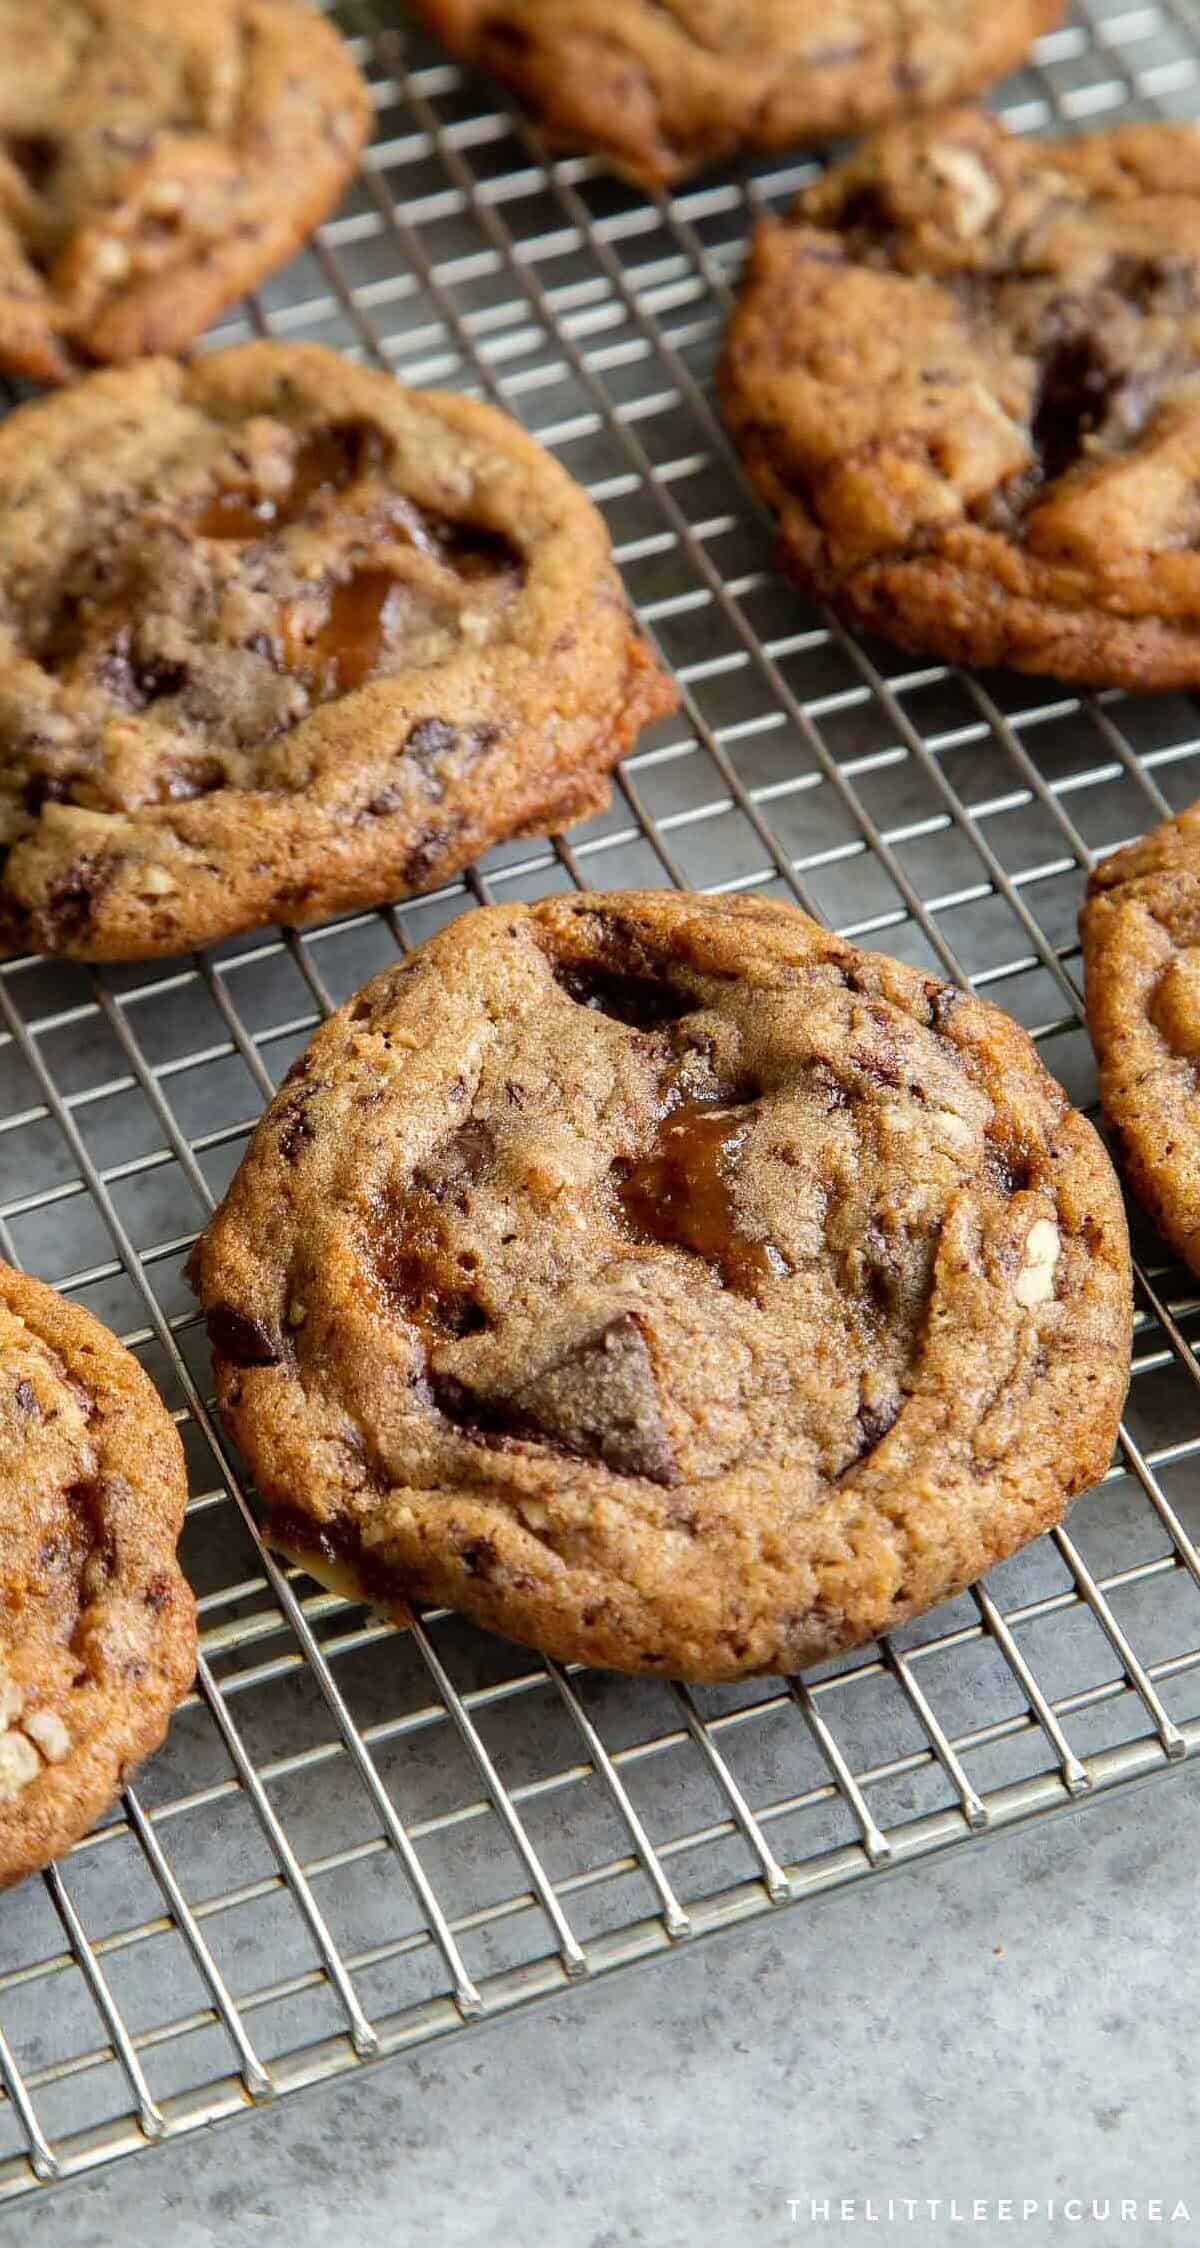  Gooey chocolate chips, crunchy pecans, and chewy toffee come together in these cookies.